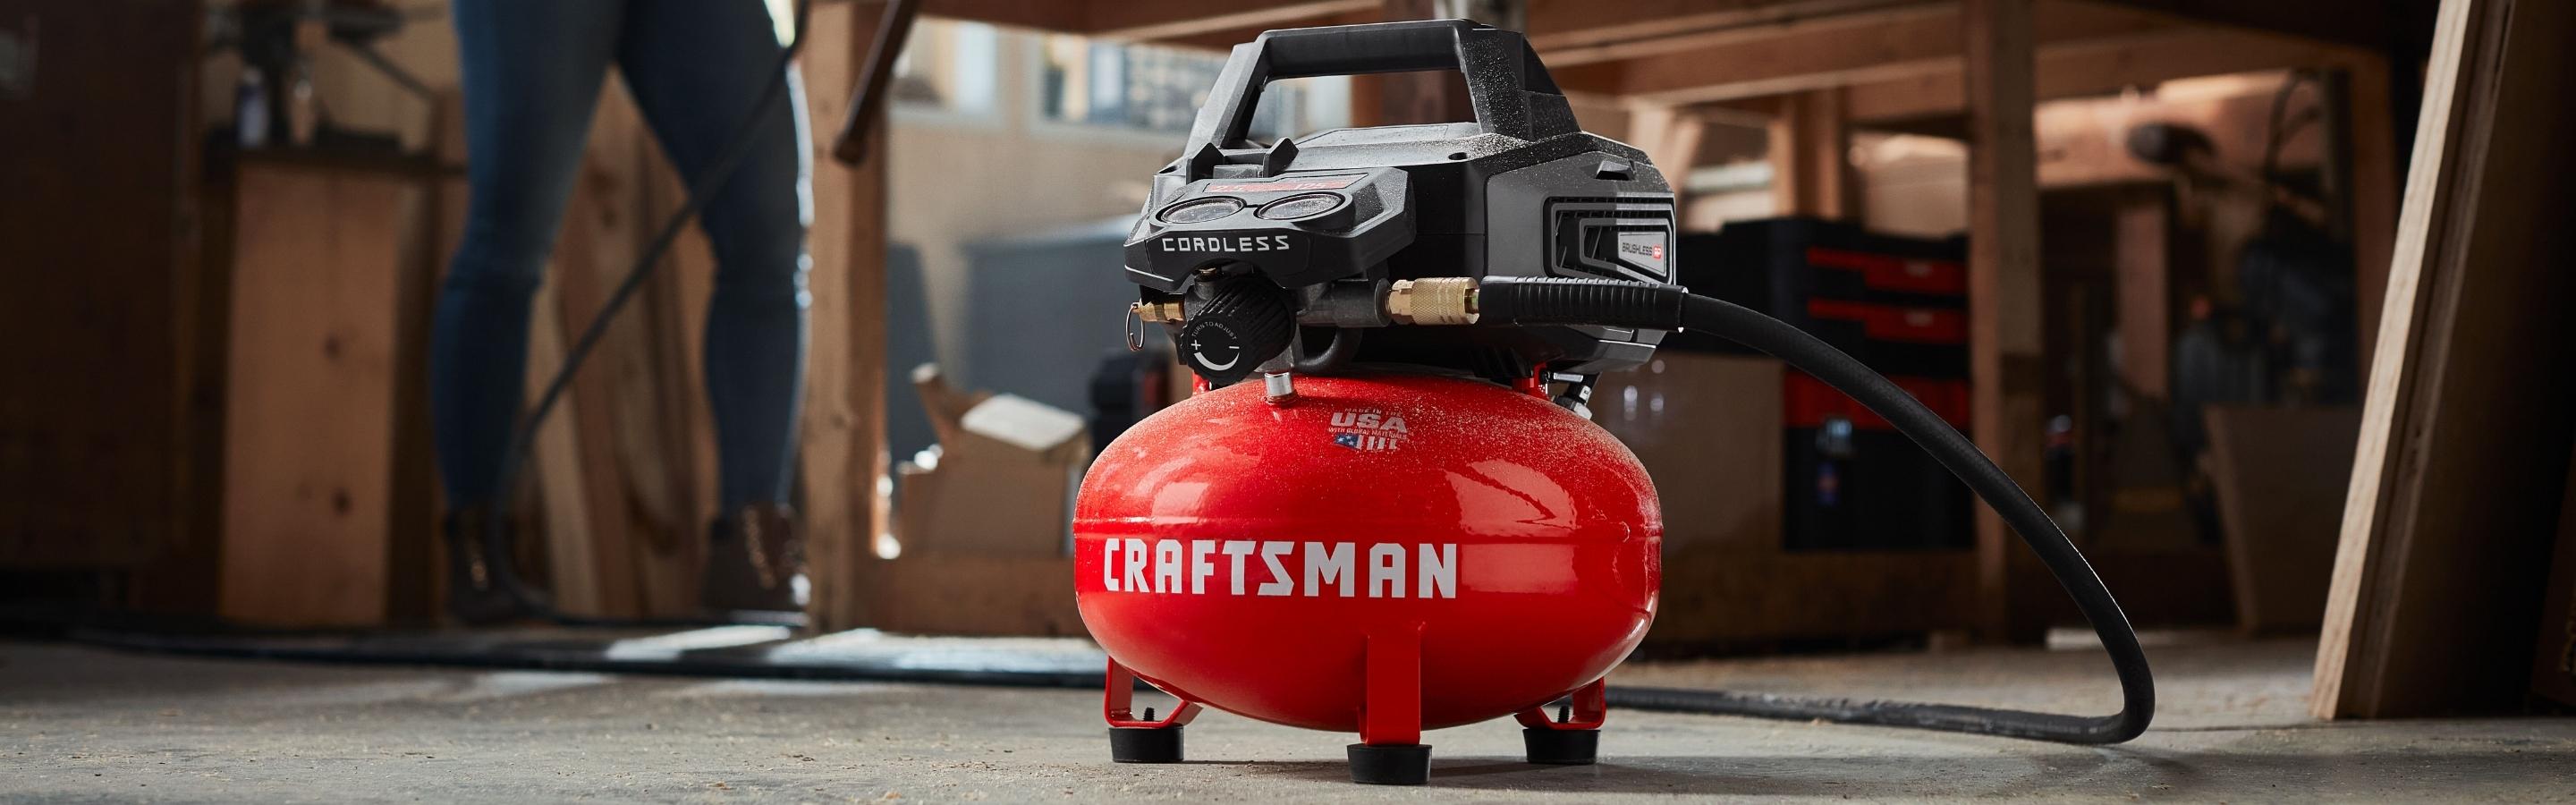 Air Compressors - Portable, Cordless & Corded | CRAFTSMAN